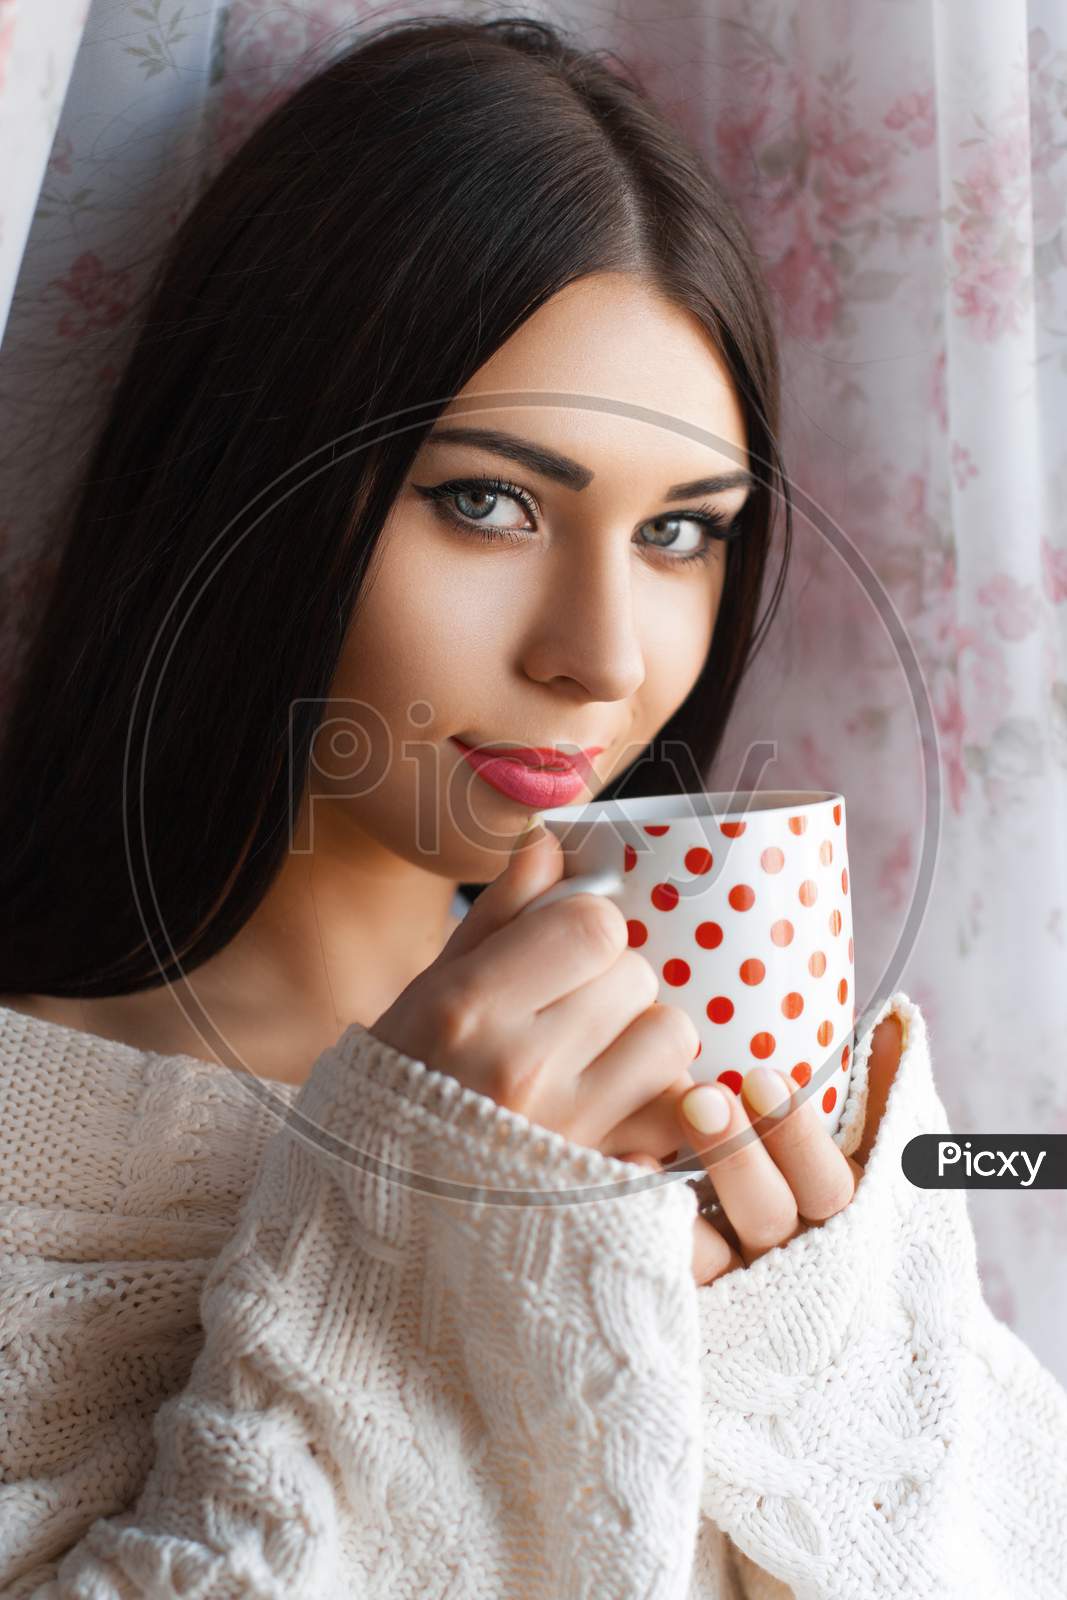 Beautiful Girl With Long Hair Drinking Coffee By The Window